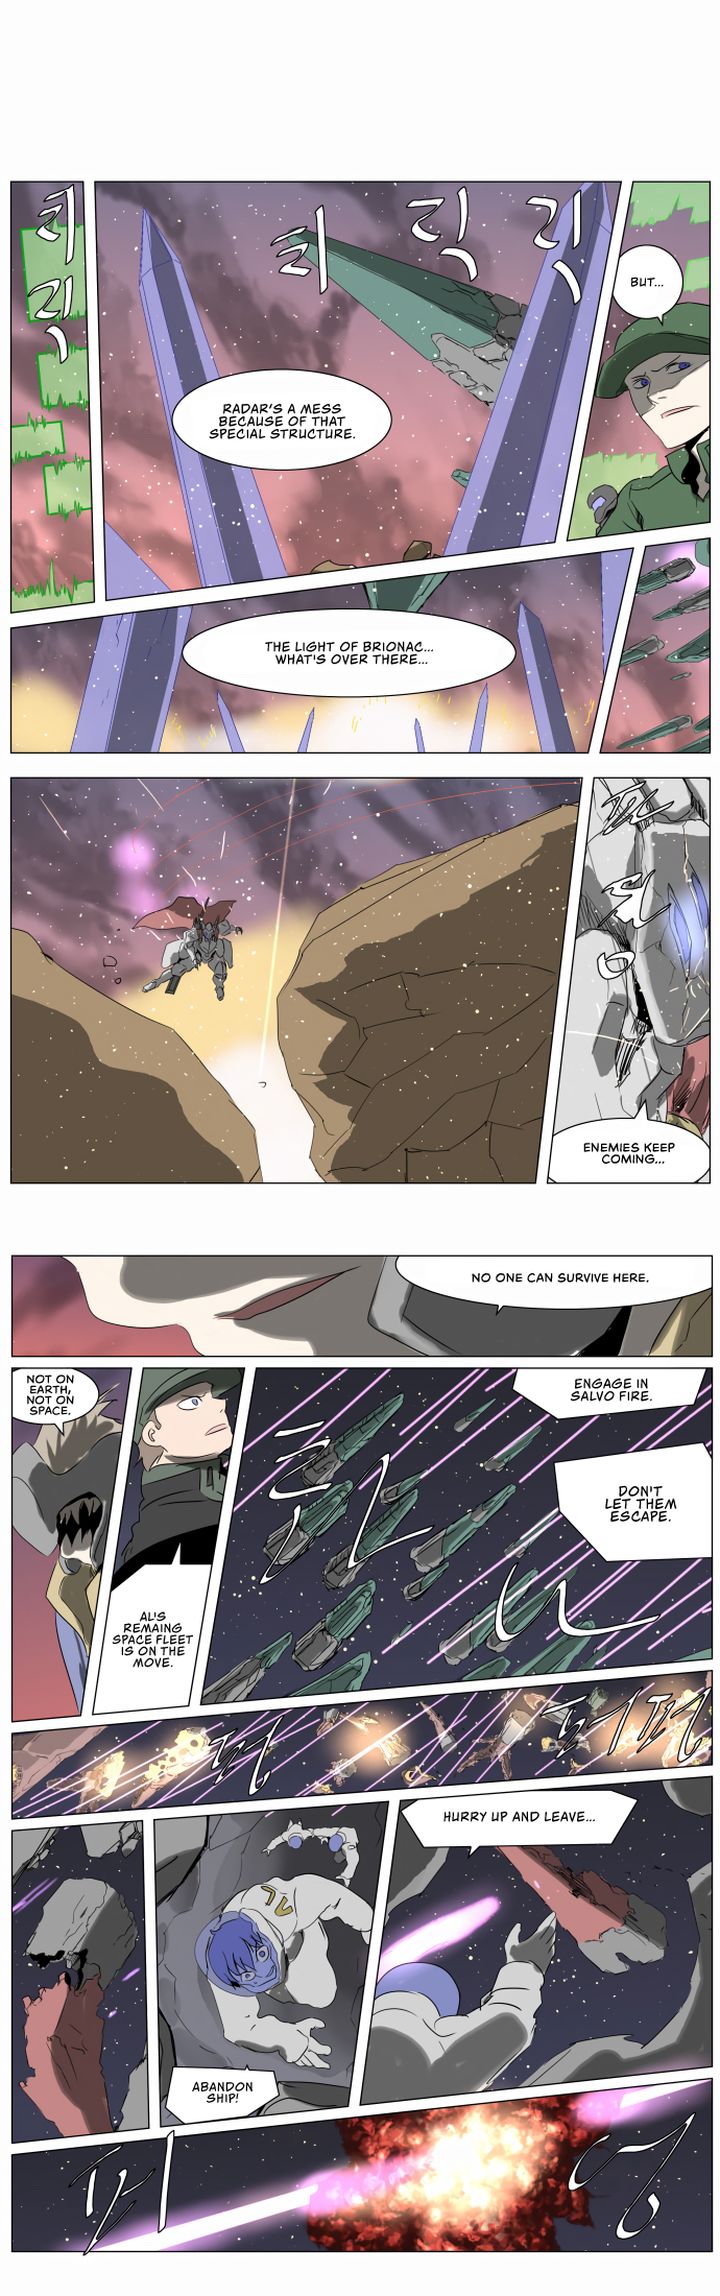 Knight Run Chapter 227 Page 4